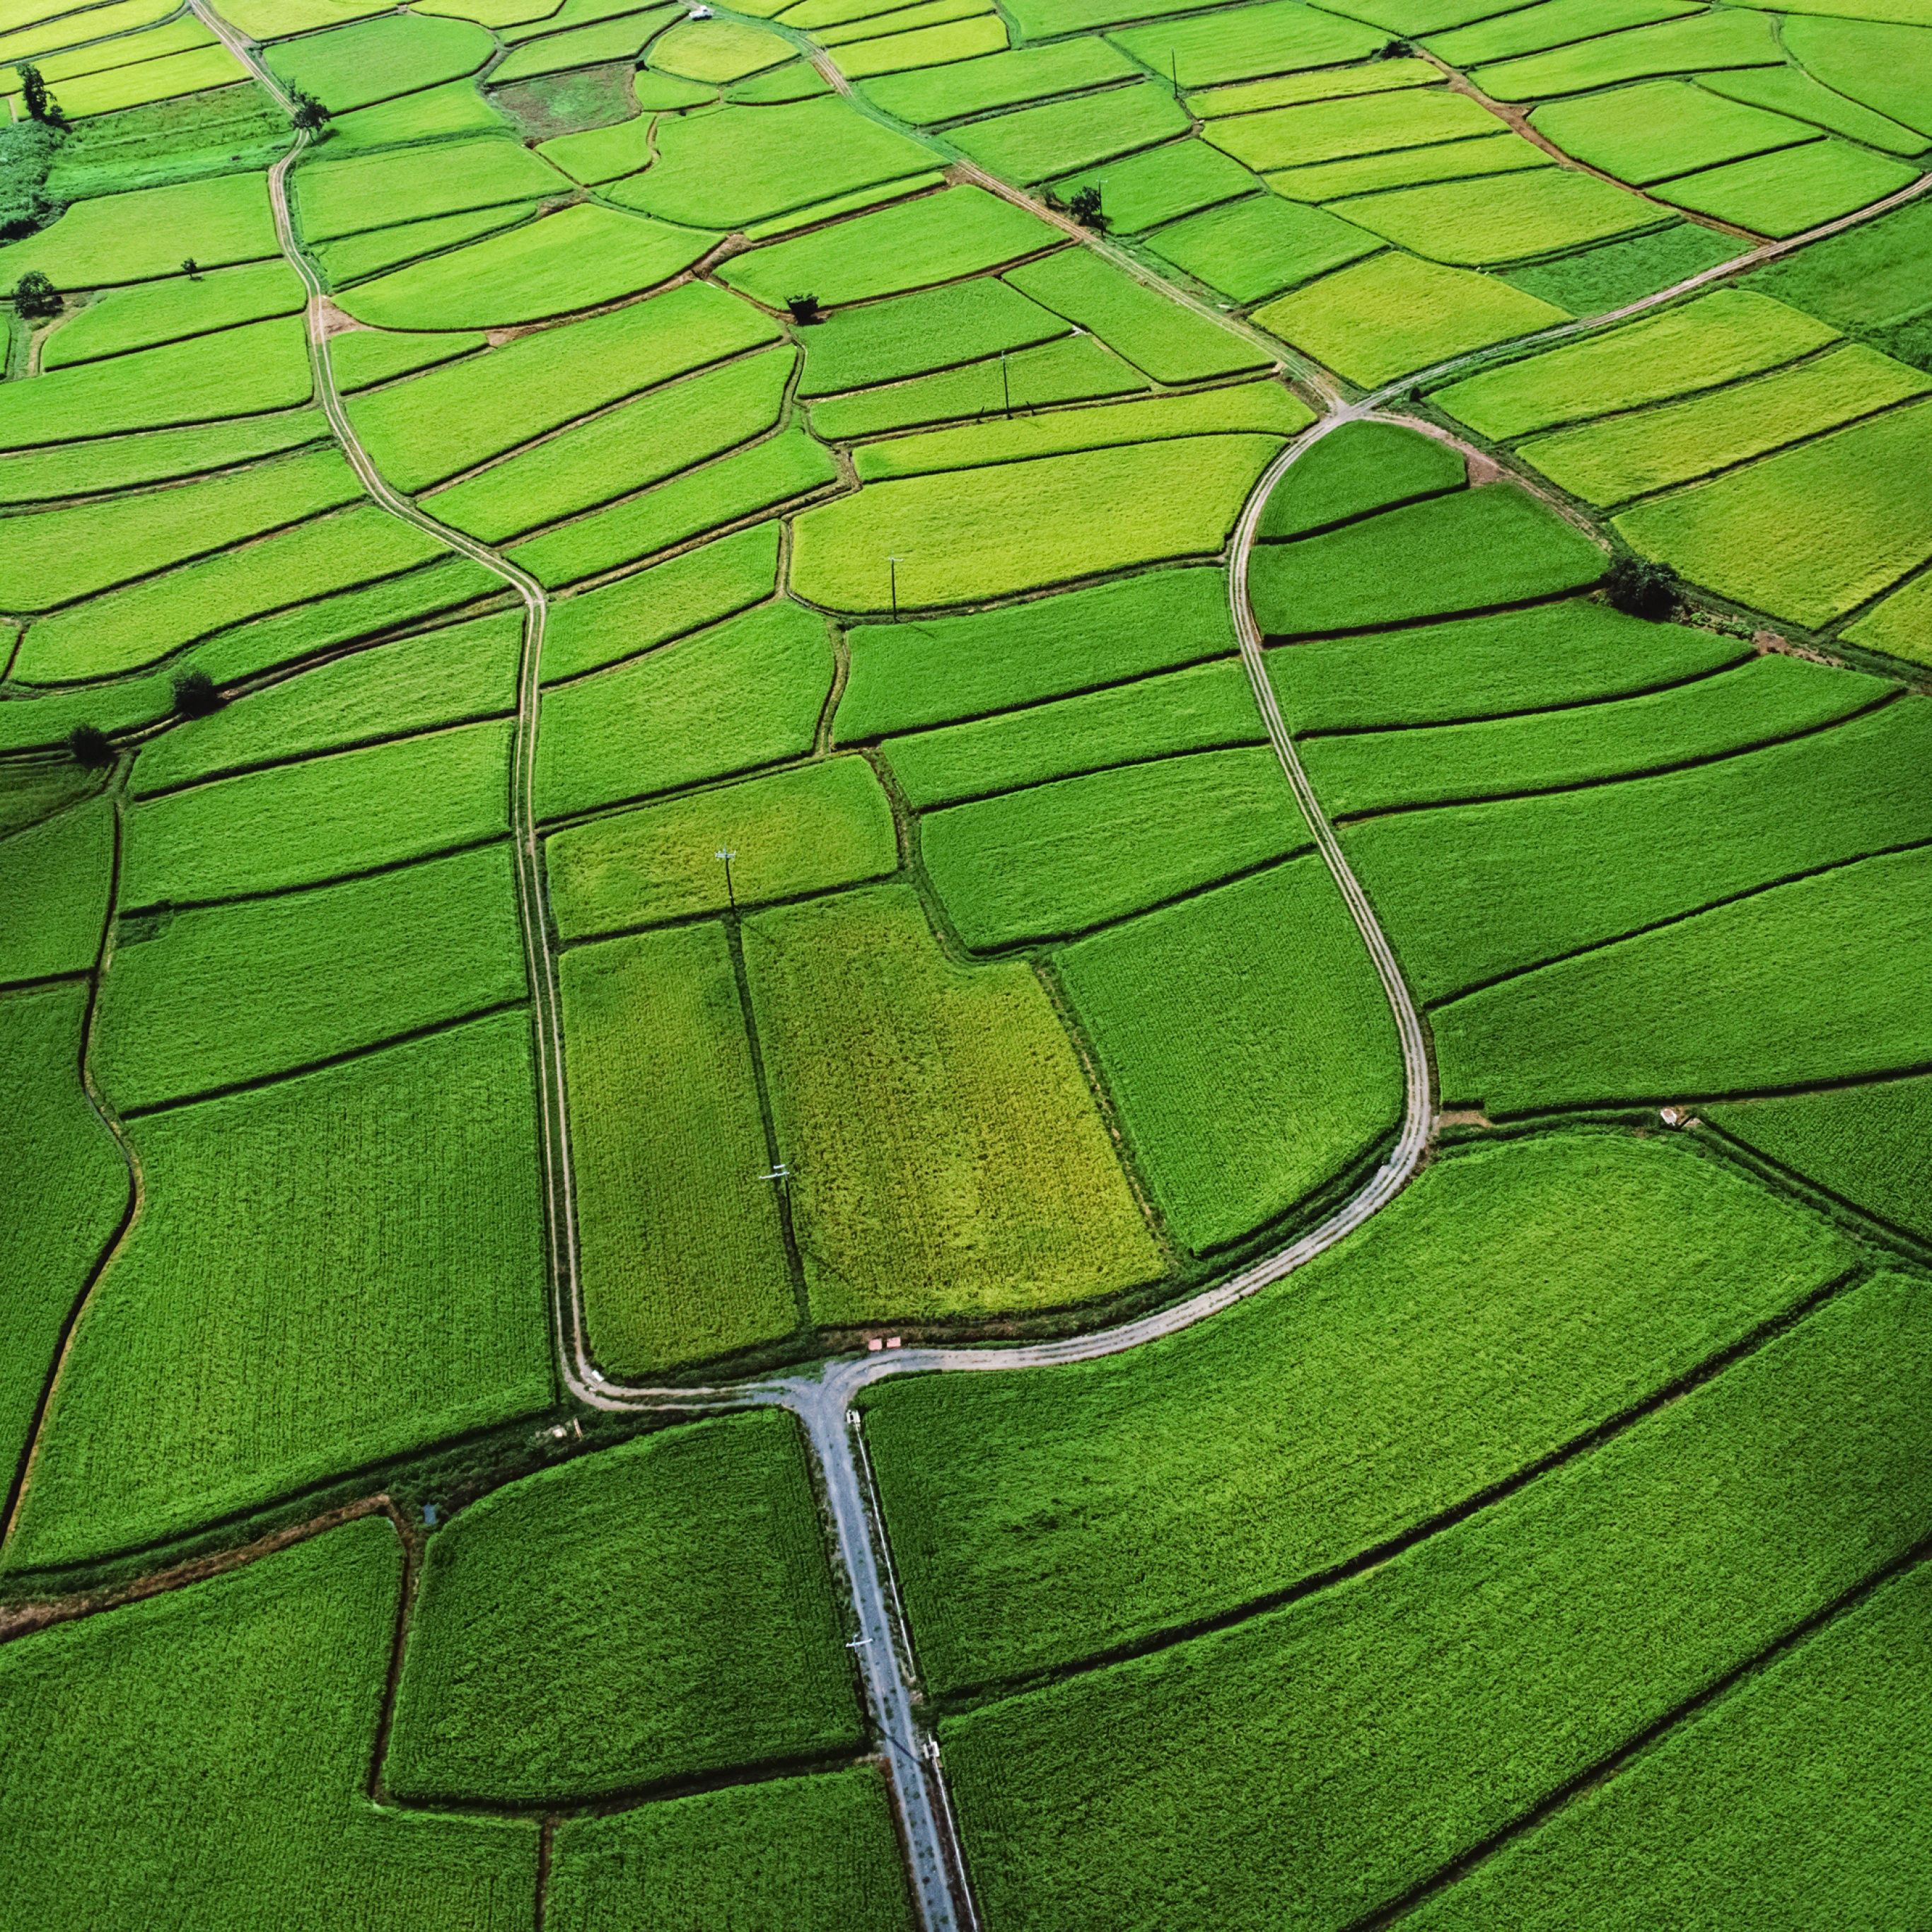 Aerial view of a green rice field - Farm